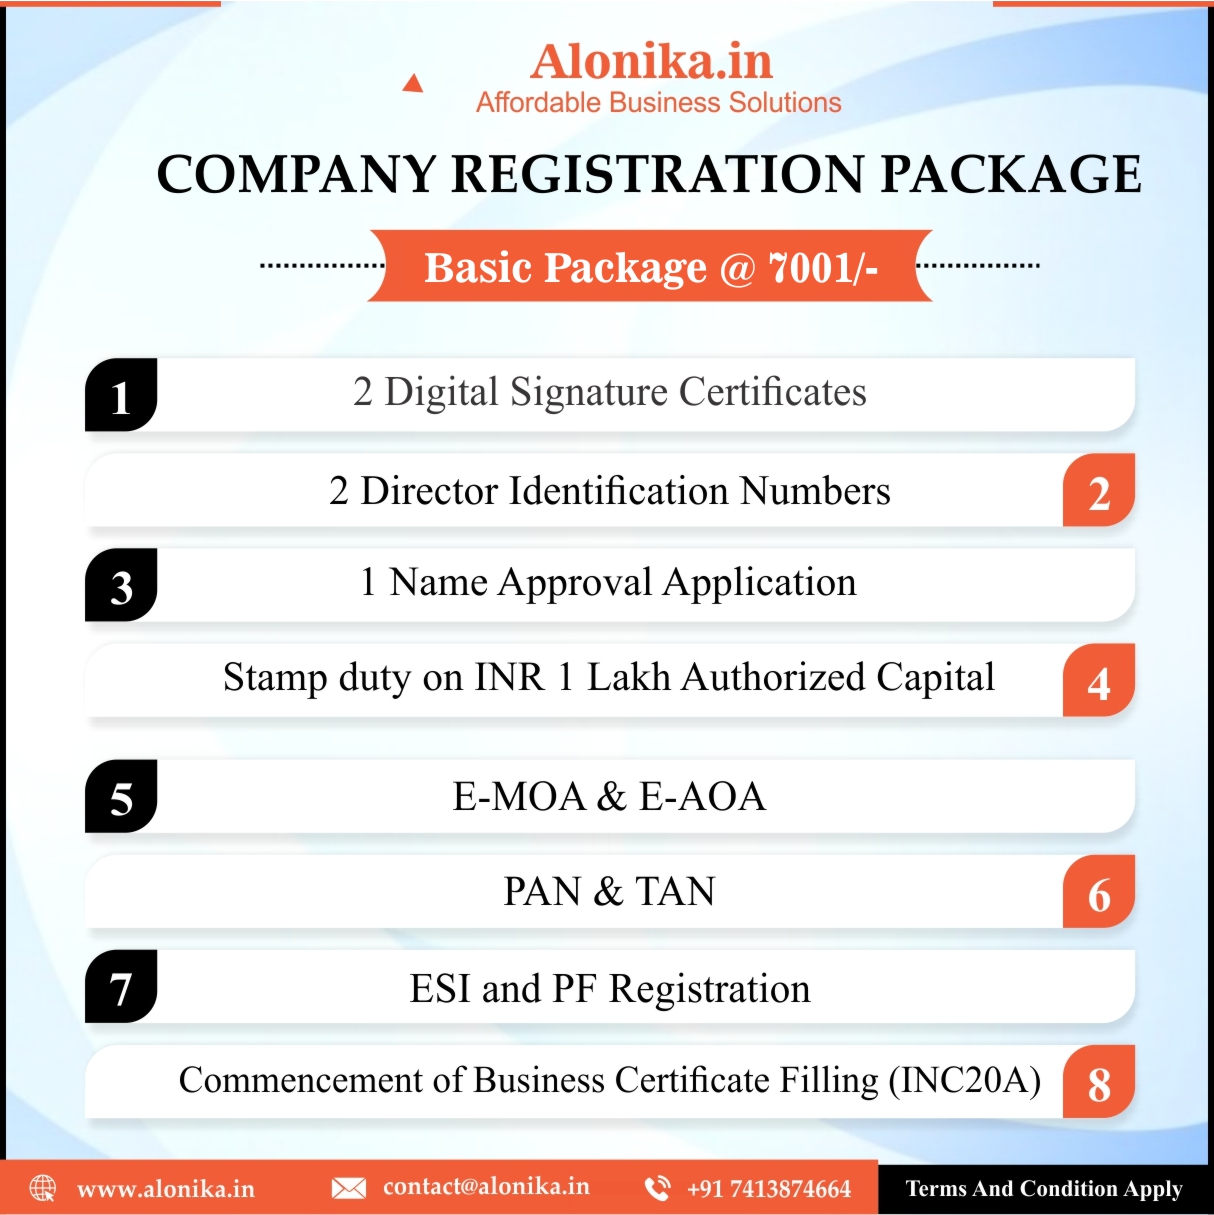 What are the essential documents required for company registration in Kolkata?